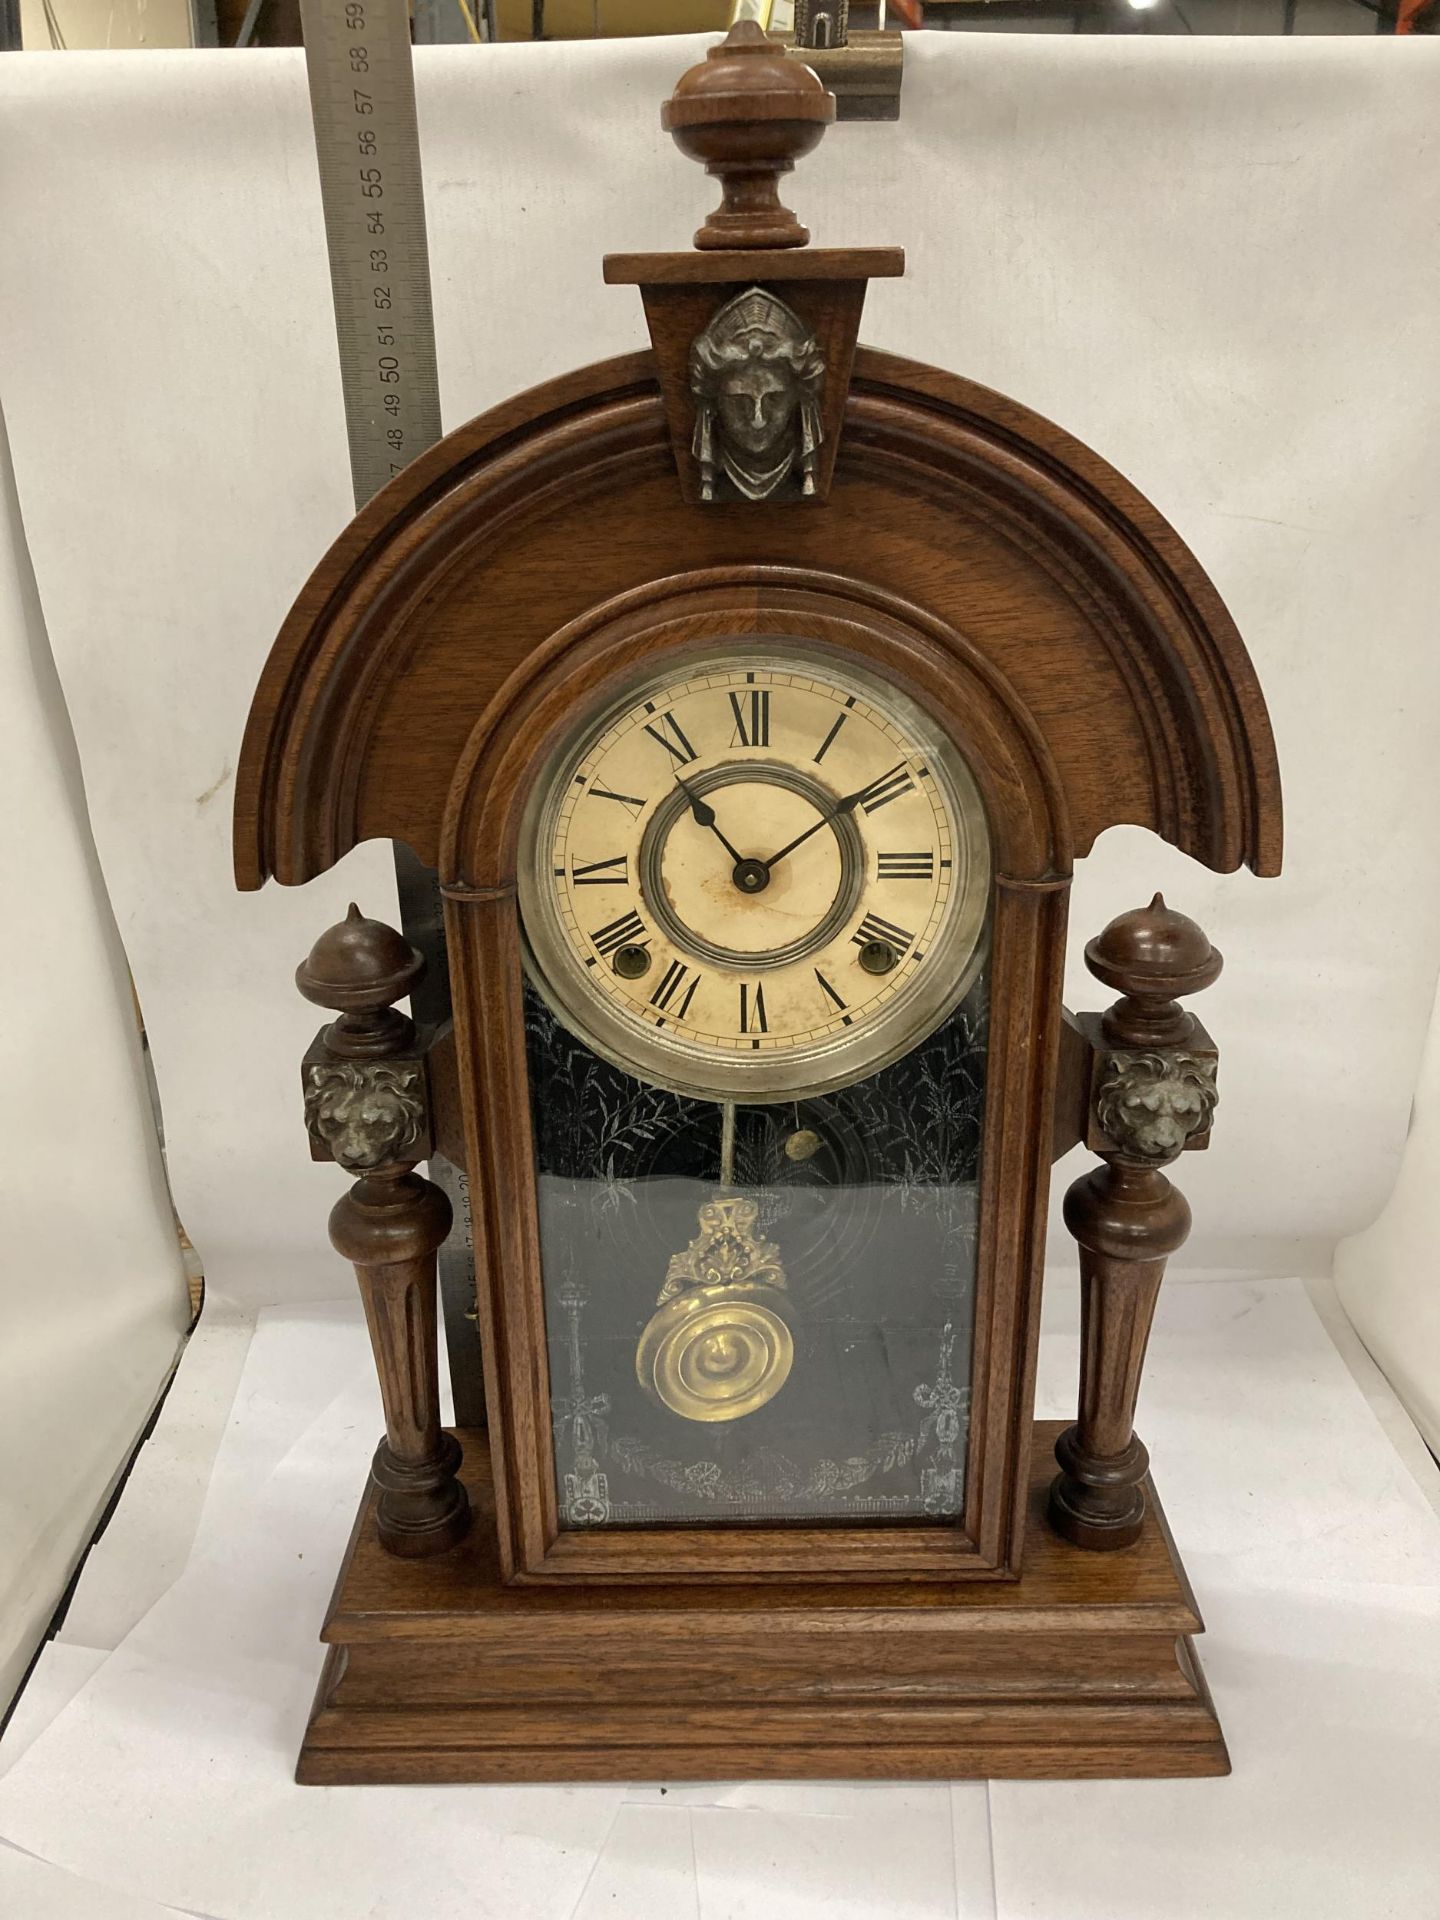 A VINTAGE OAK CHIMING MANTLE CLOCK WITH COLUMN SUPPORTS HAVING LION HEAD DESIGN, WITH PENDULUM,